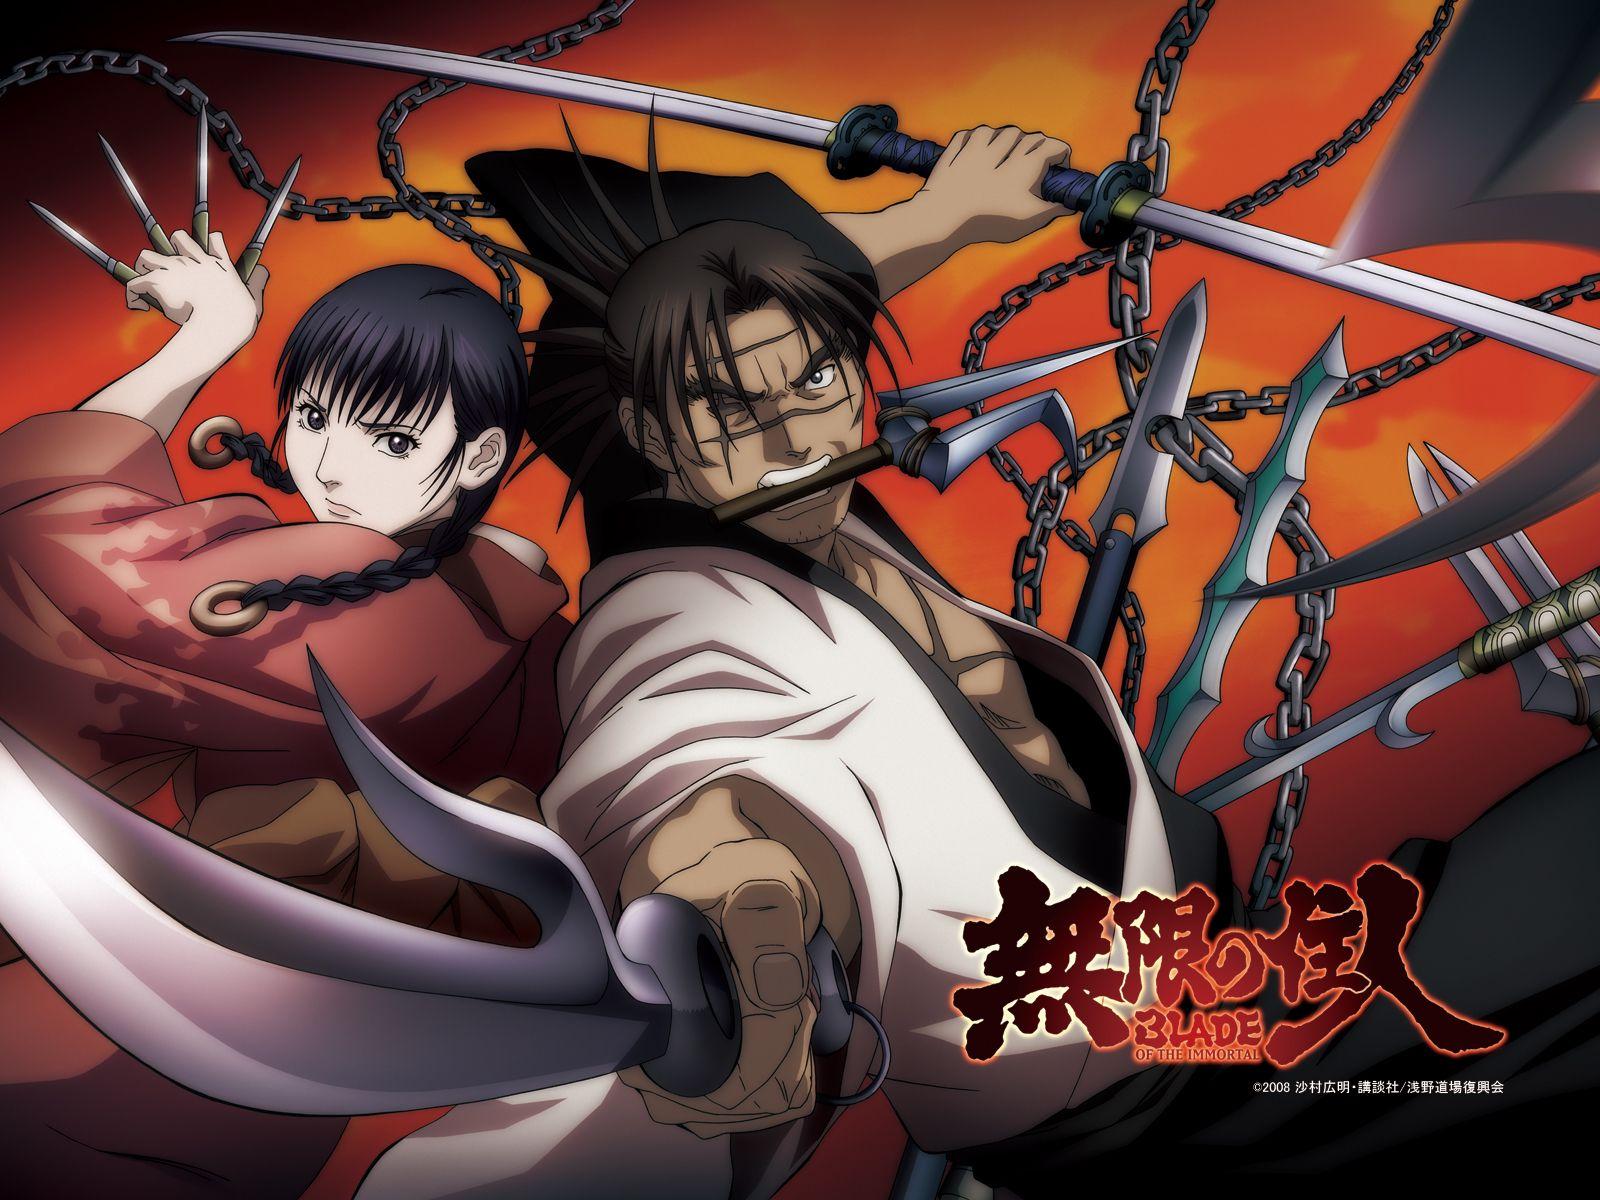 Blade of the Immortal wallpaper and image, picture